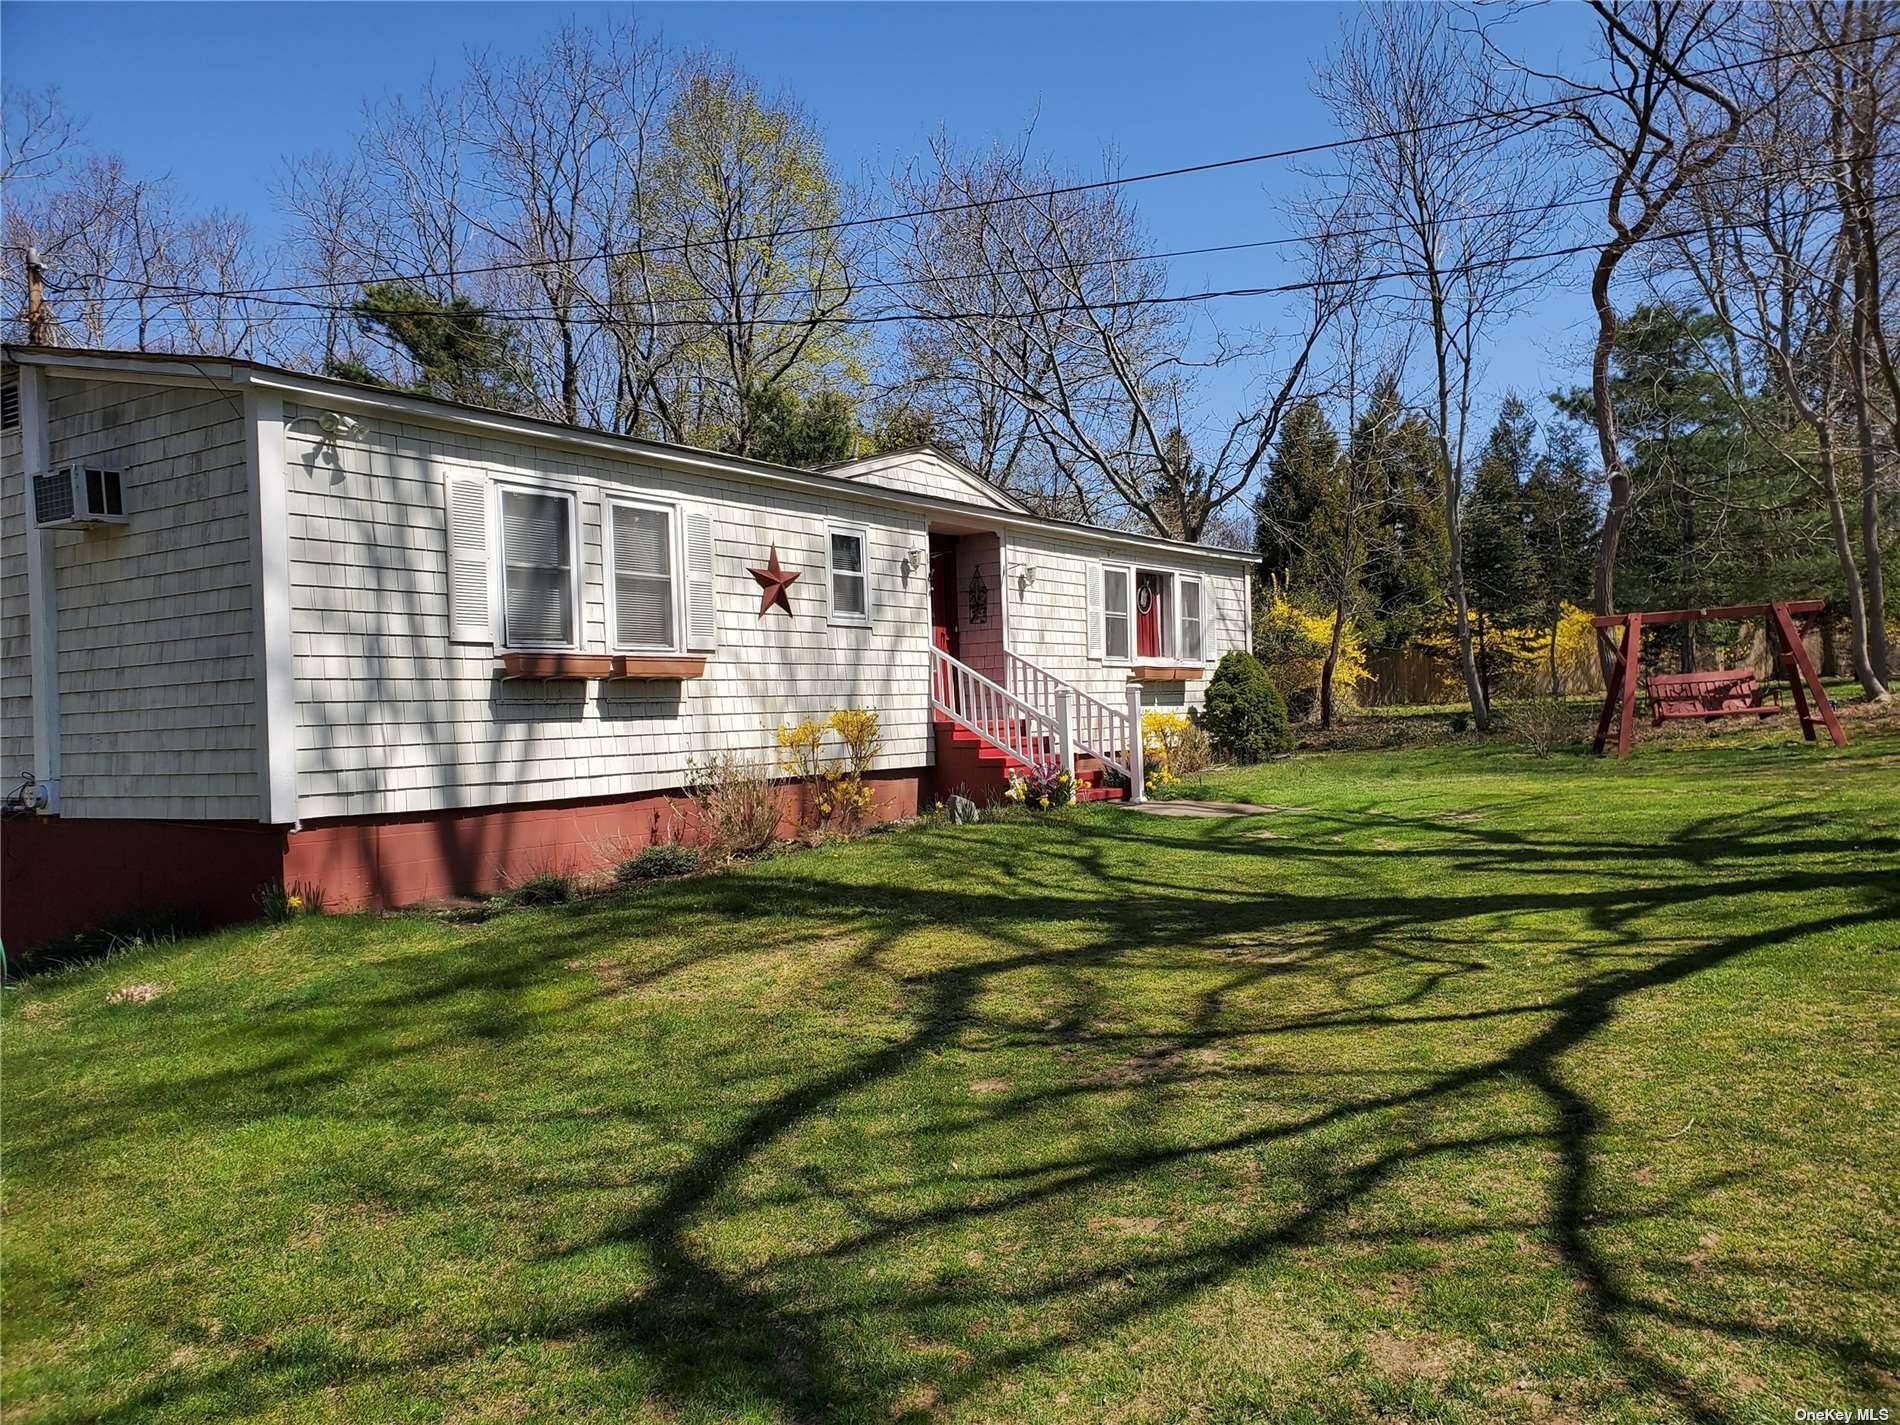 Cozy 2 bedroom, 2 bath ranch style home with utopic back yard.